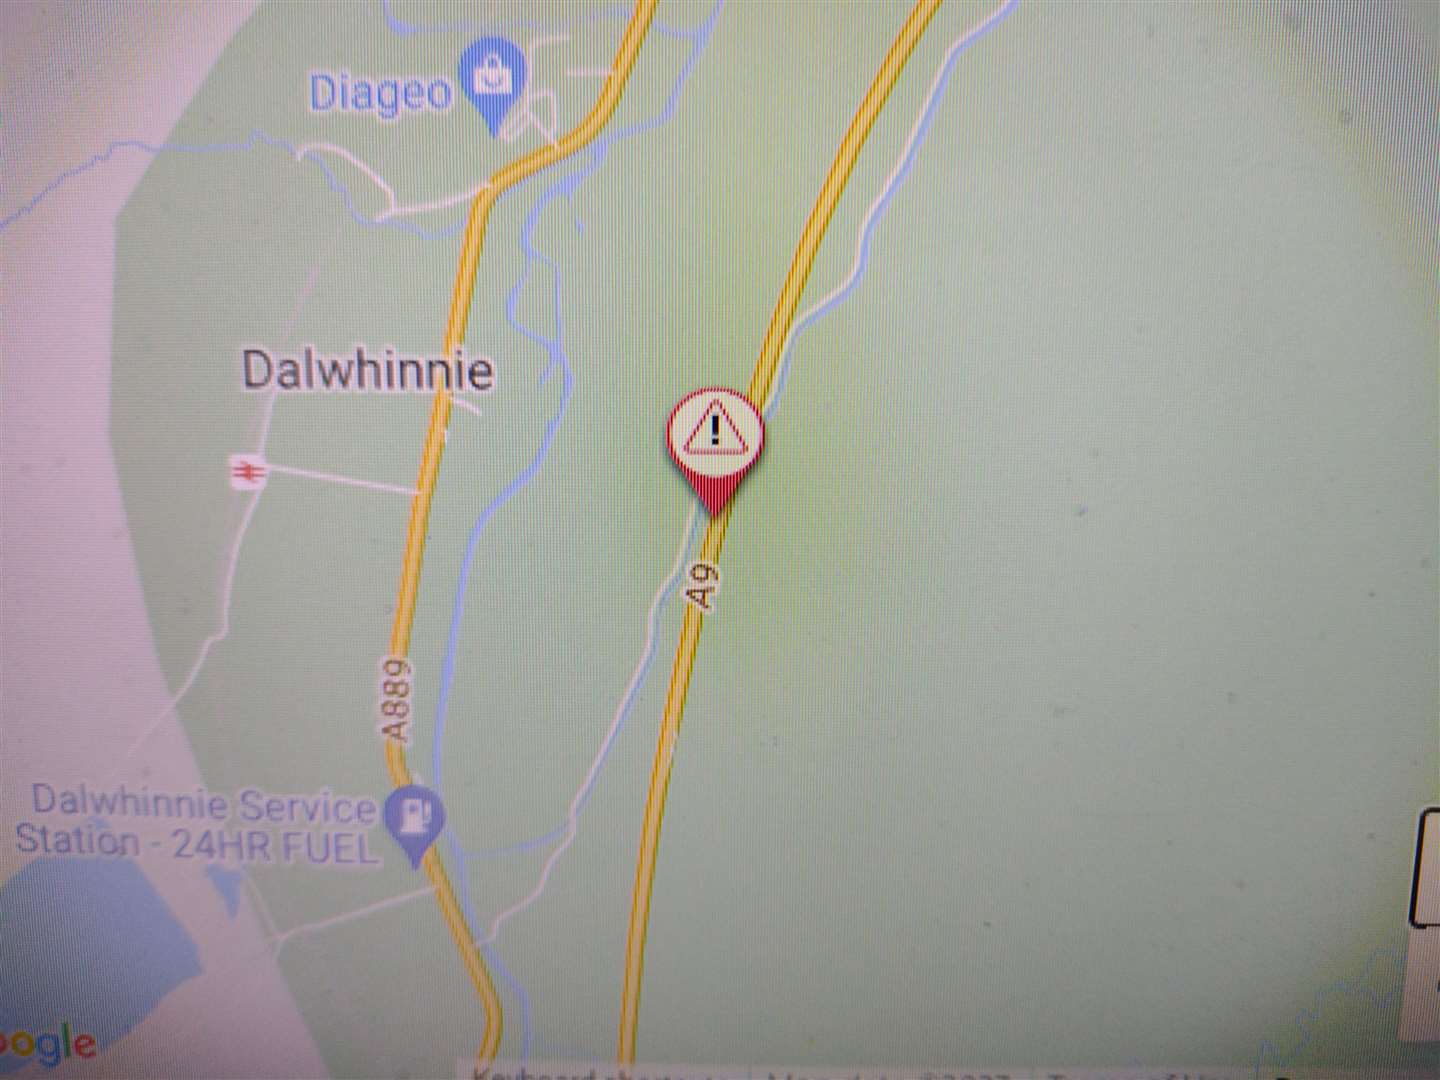 Location of today's incident on the A9